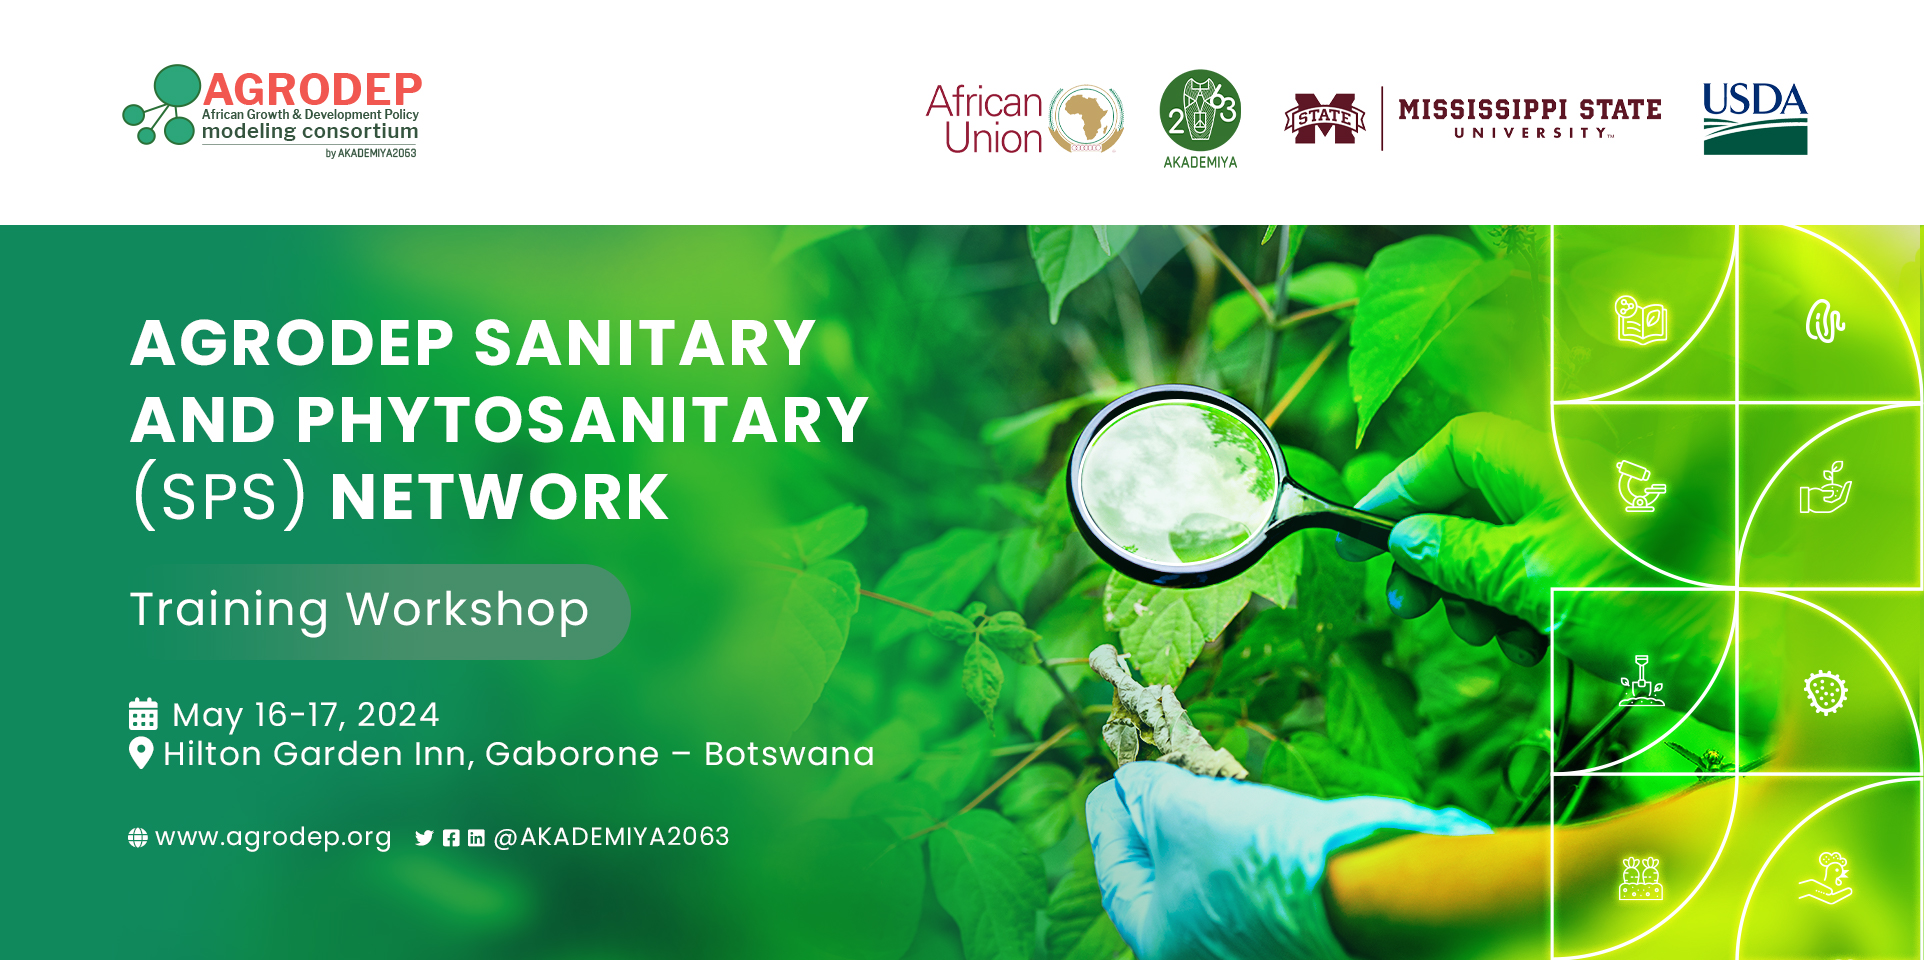 AGRODEP SANITARY AND PHYTOSANITARY (SPS) NETWORK - Training Workshop